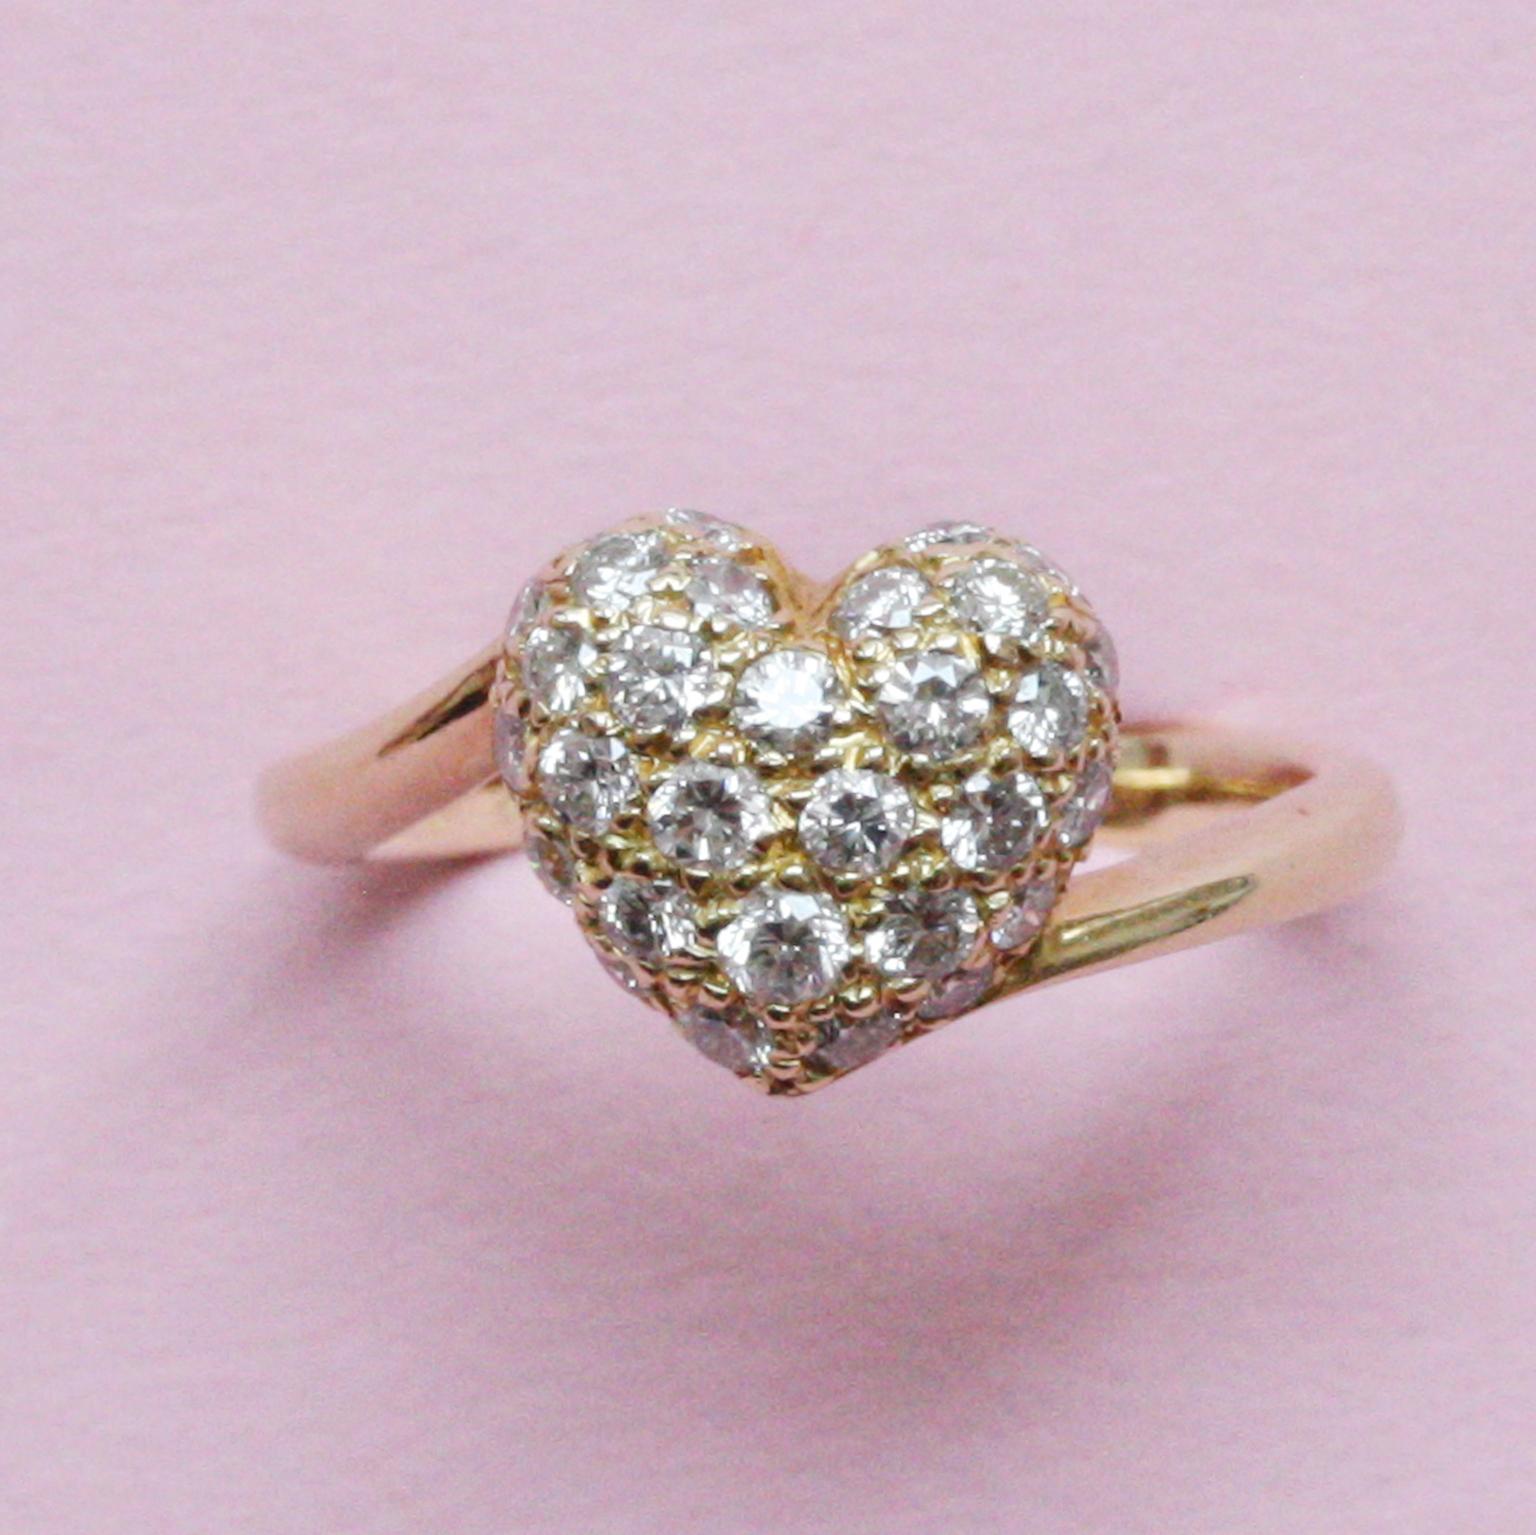 An 18 carat gold ring with a puffy heart set with brilliant cut diamonds (app. 0.5 carat in total), signed and numbered: Cartier, 281 444 47.

ring size 15.5 mm. / 4 ¾+ 5- US.
weight: 3.26 gram
witdth: 2 - 5 mm.